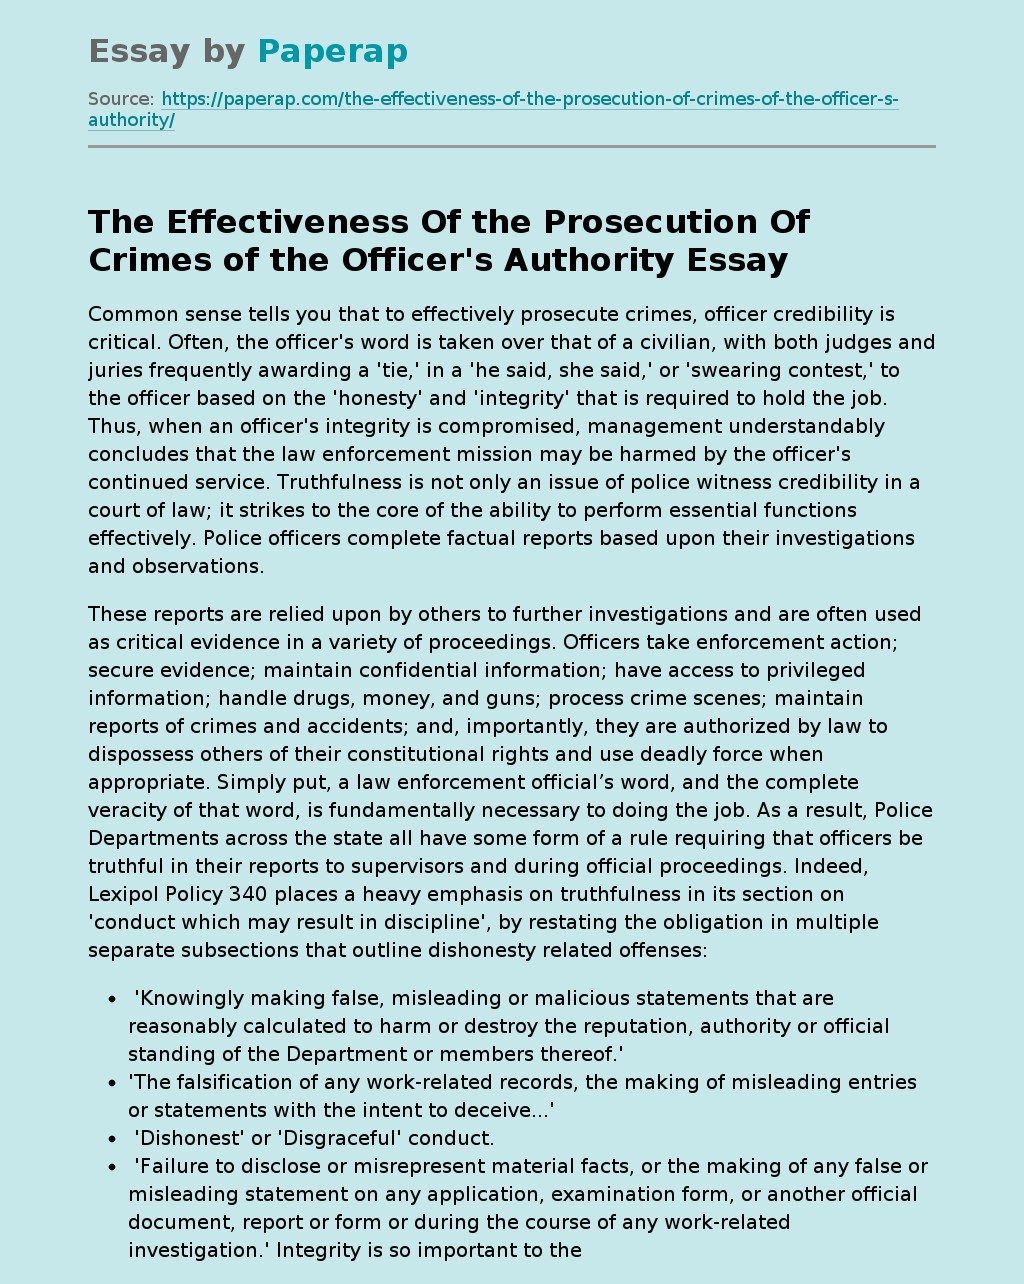 The Effectiveness Of the Prosecution Of Crimes of the Officer's Authority